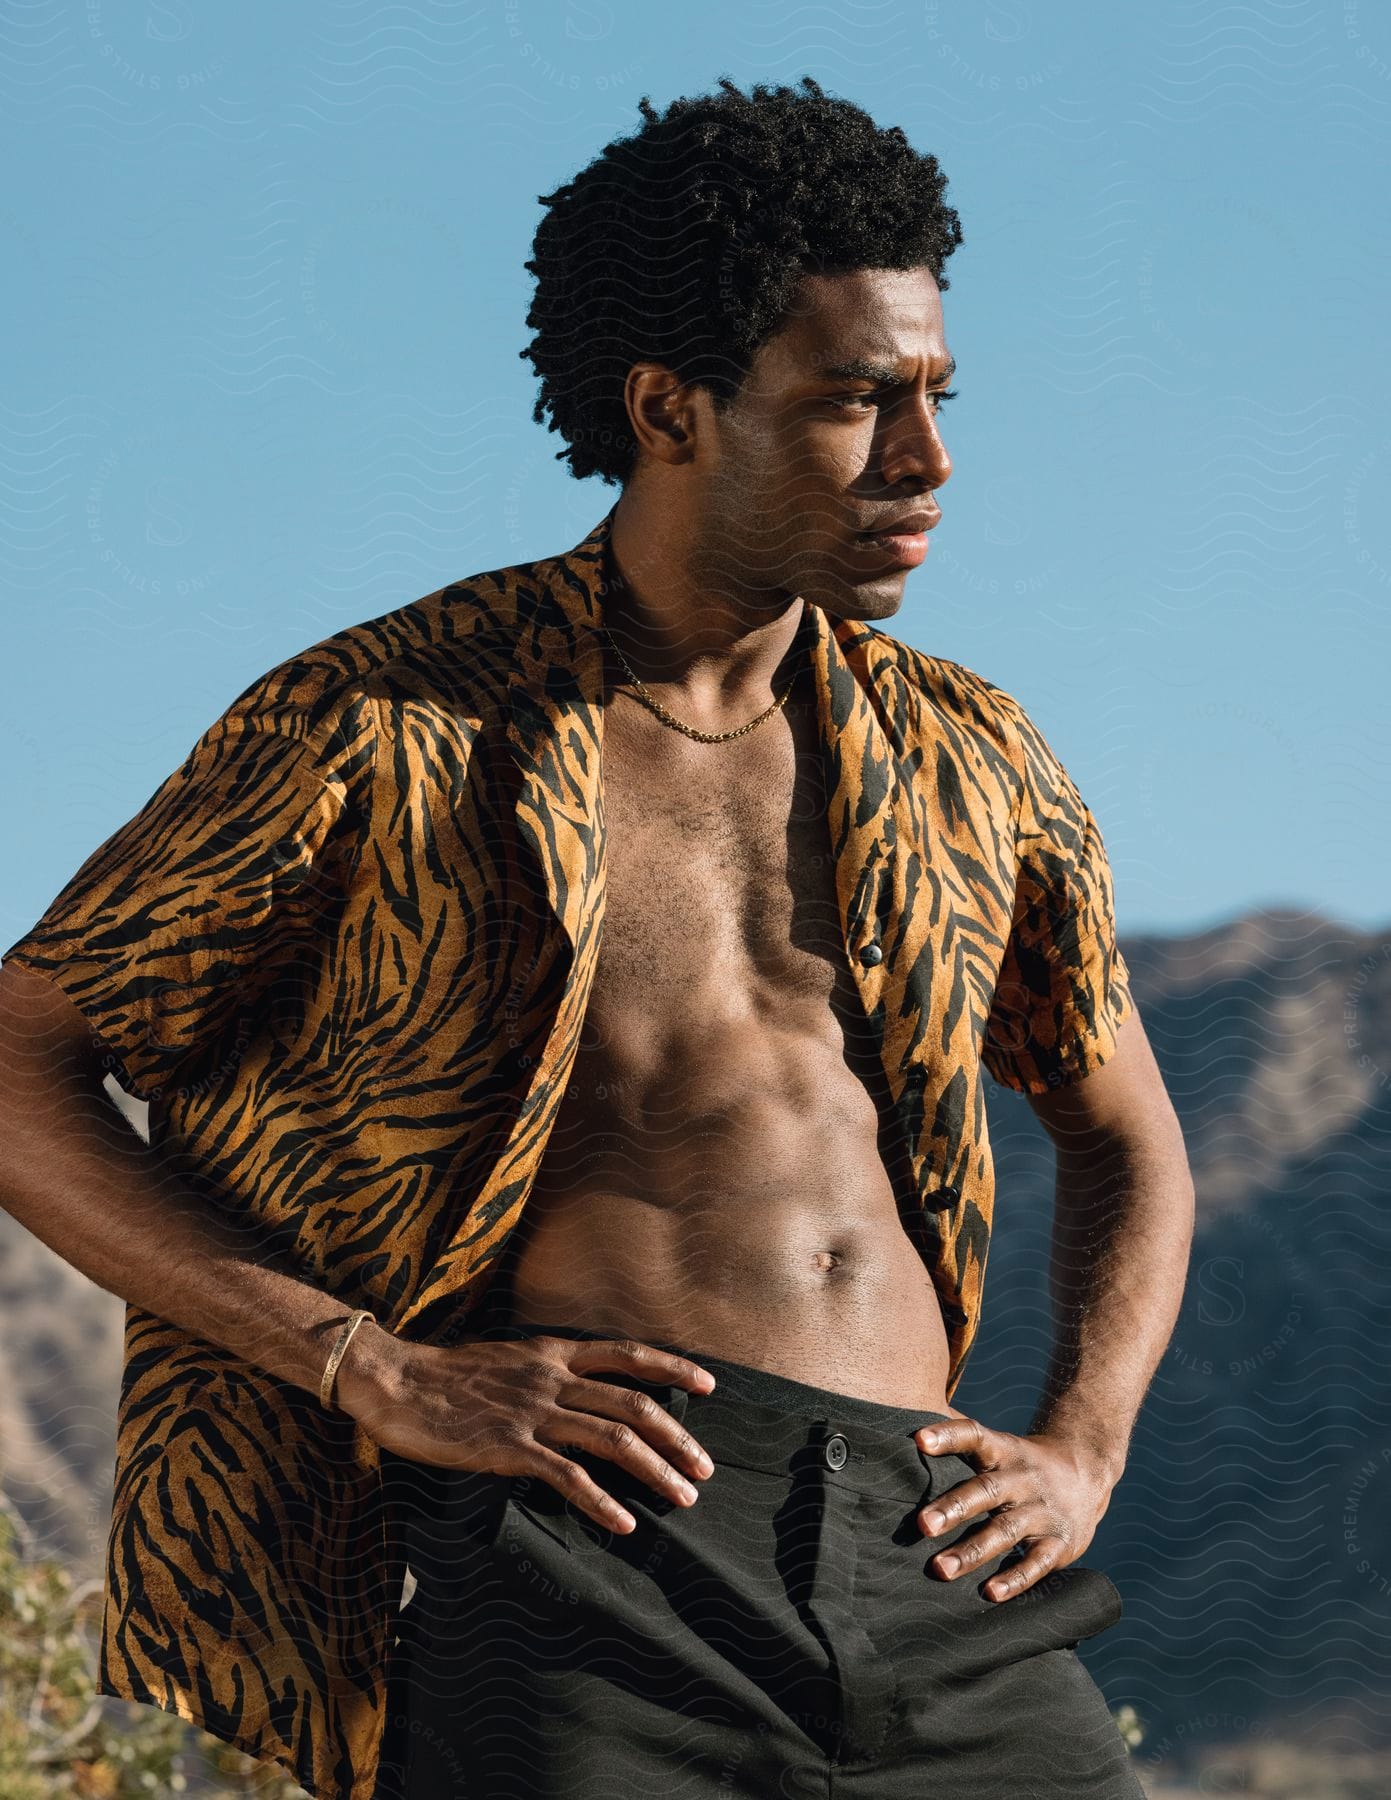 A man in an unbuttoned tiger print shirt poses in front of a mountain